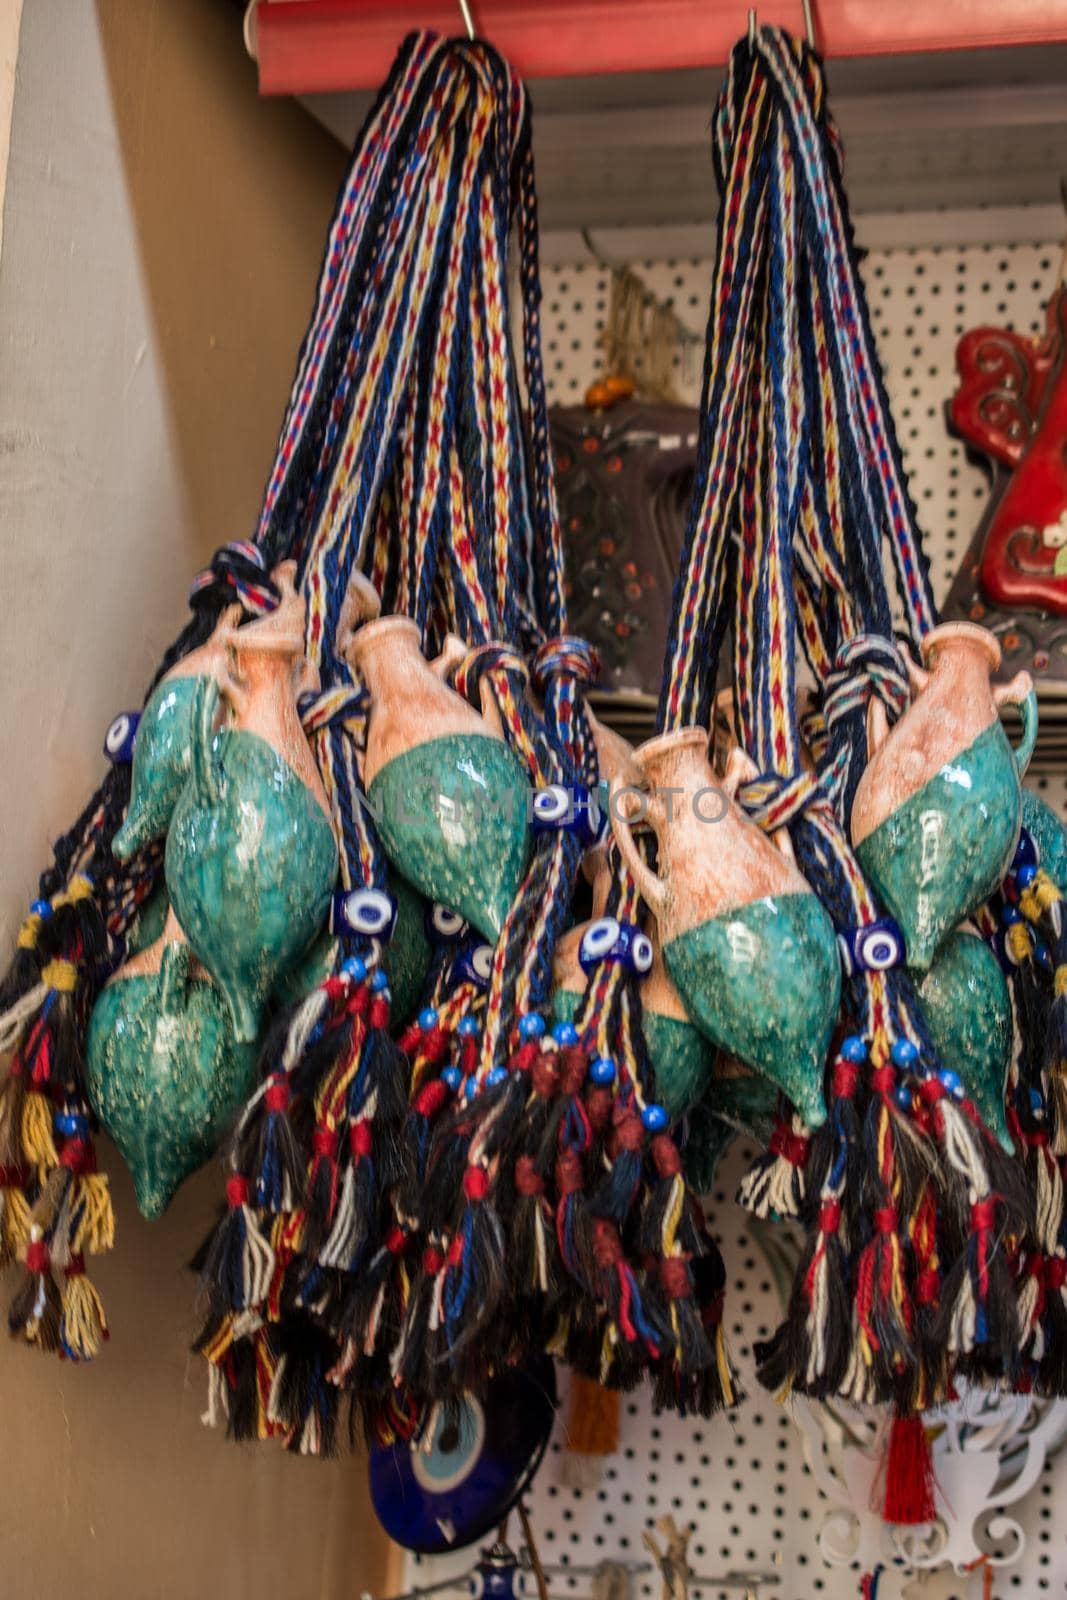 Miniature clay pitchers hanging in a store by berkay